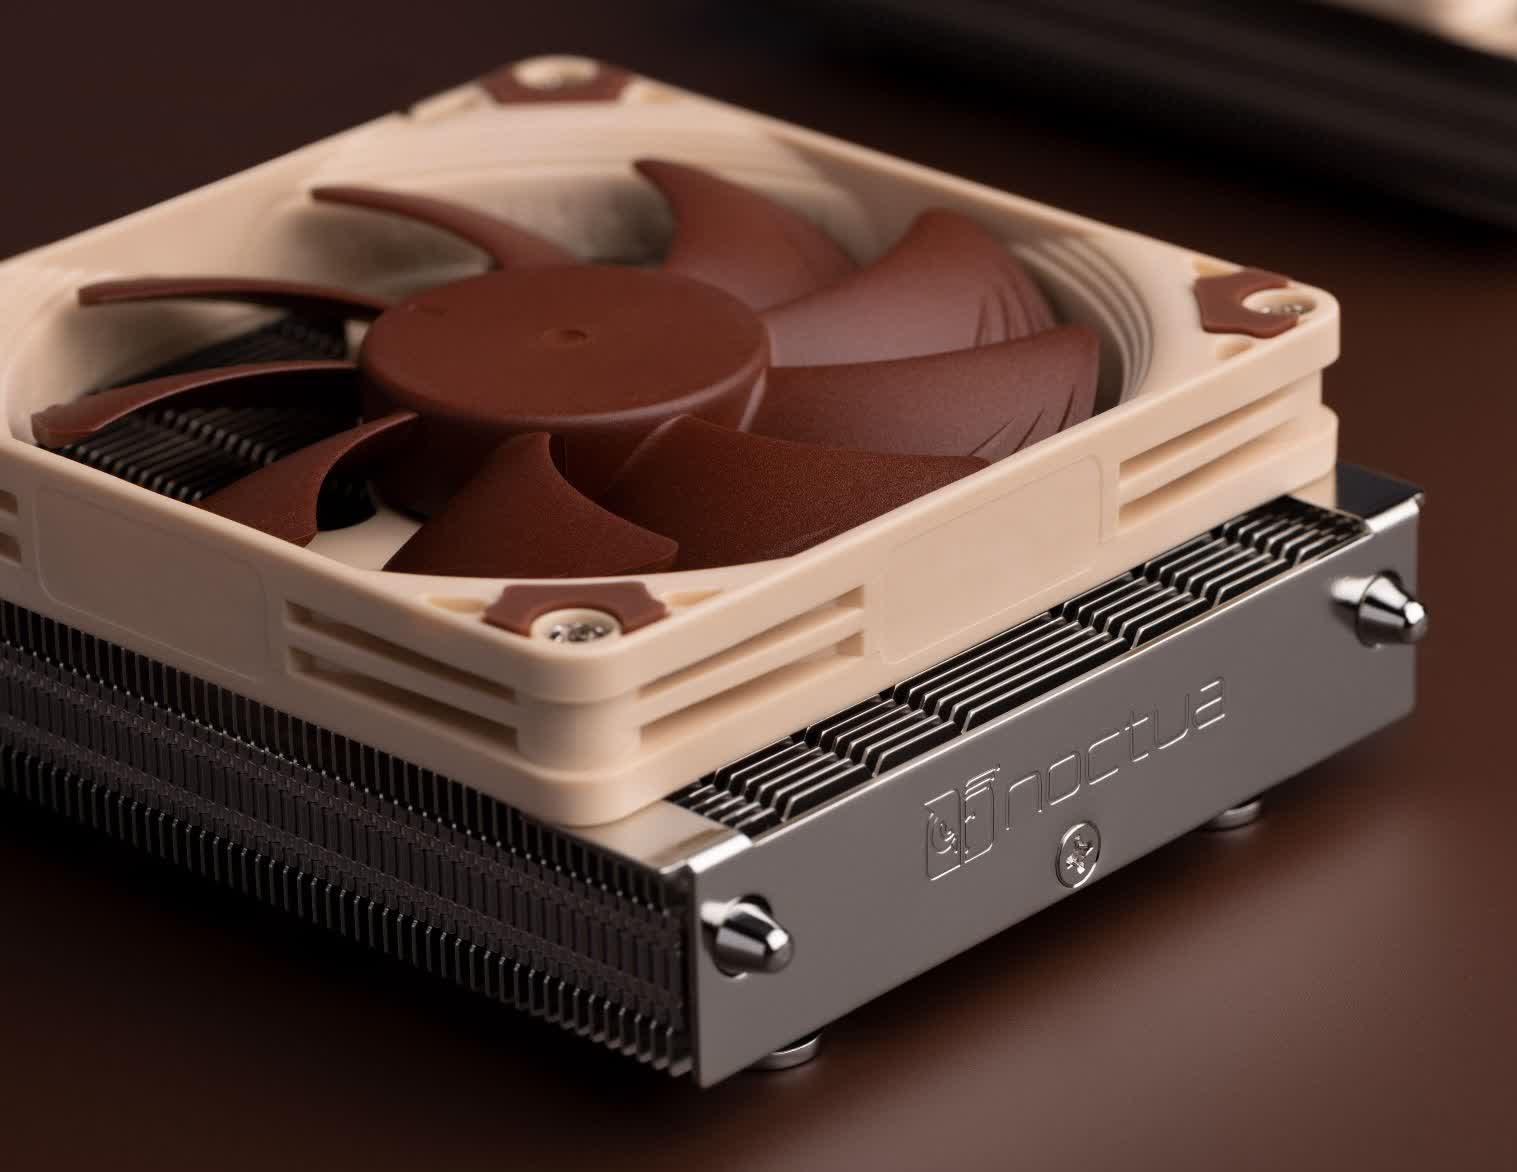 Noctua launches low profile coolers for AMD's new Ryzen processors